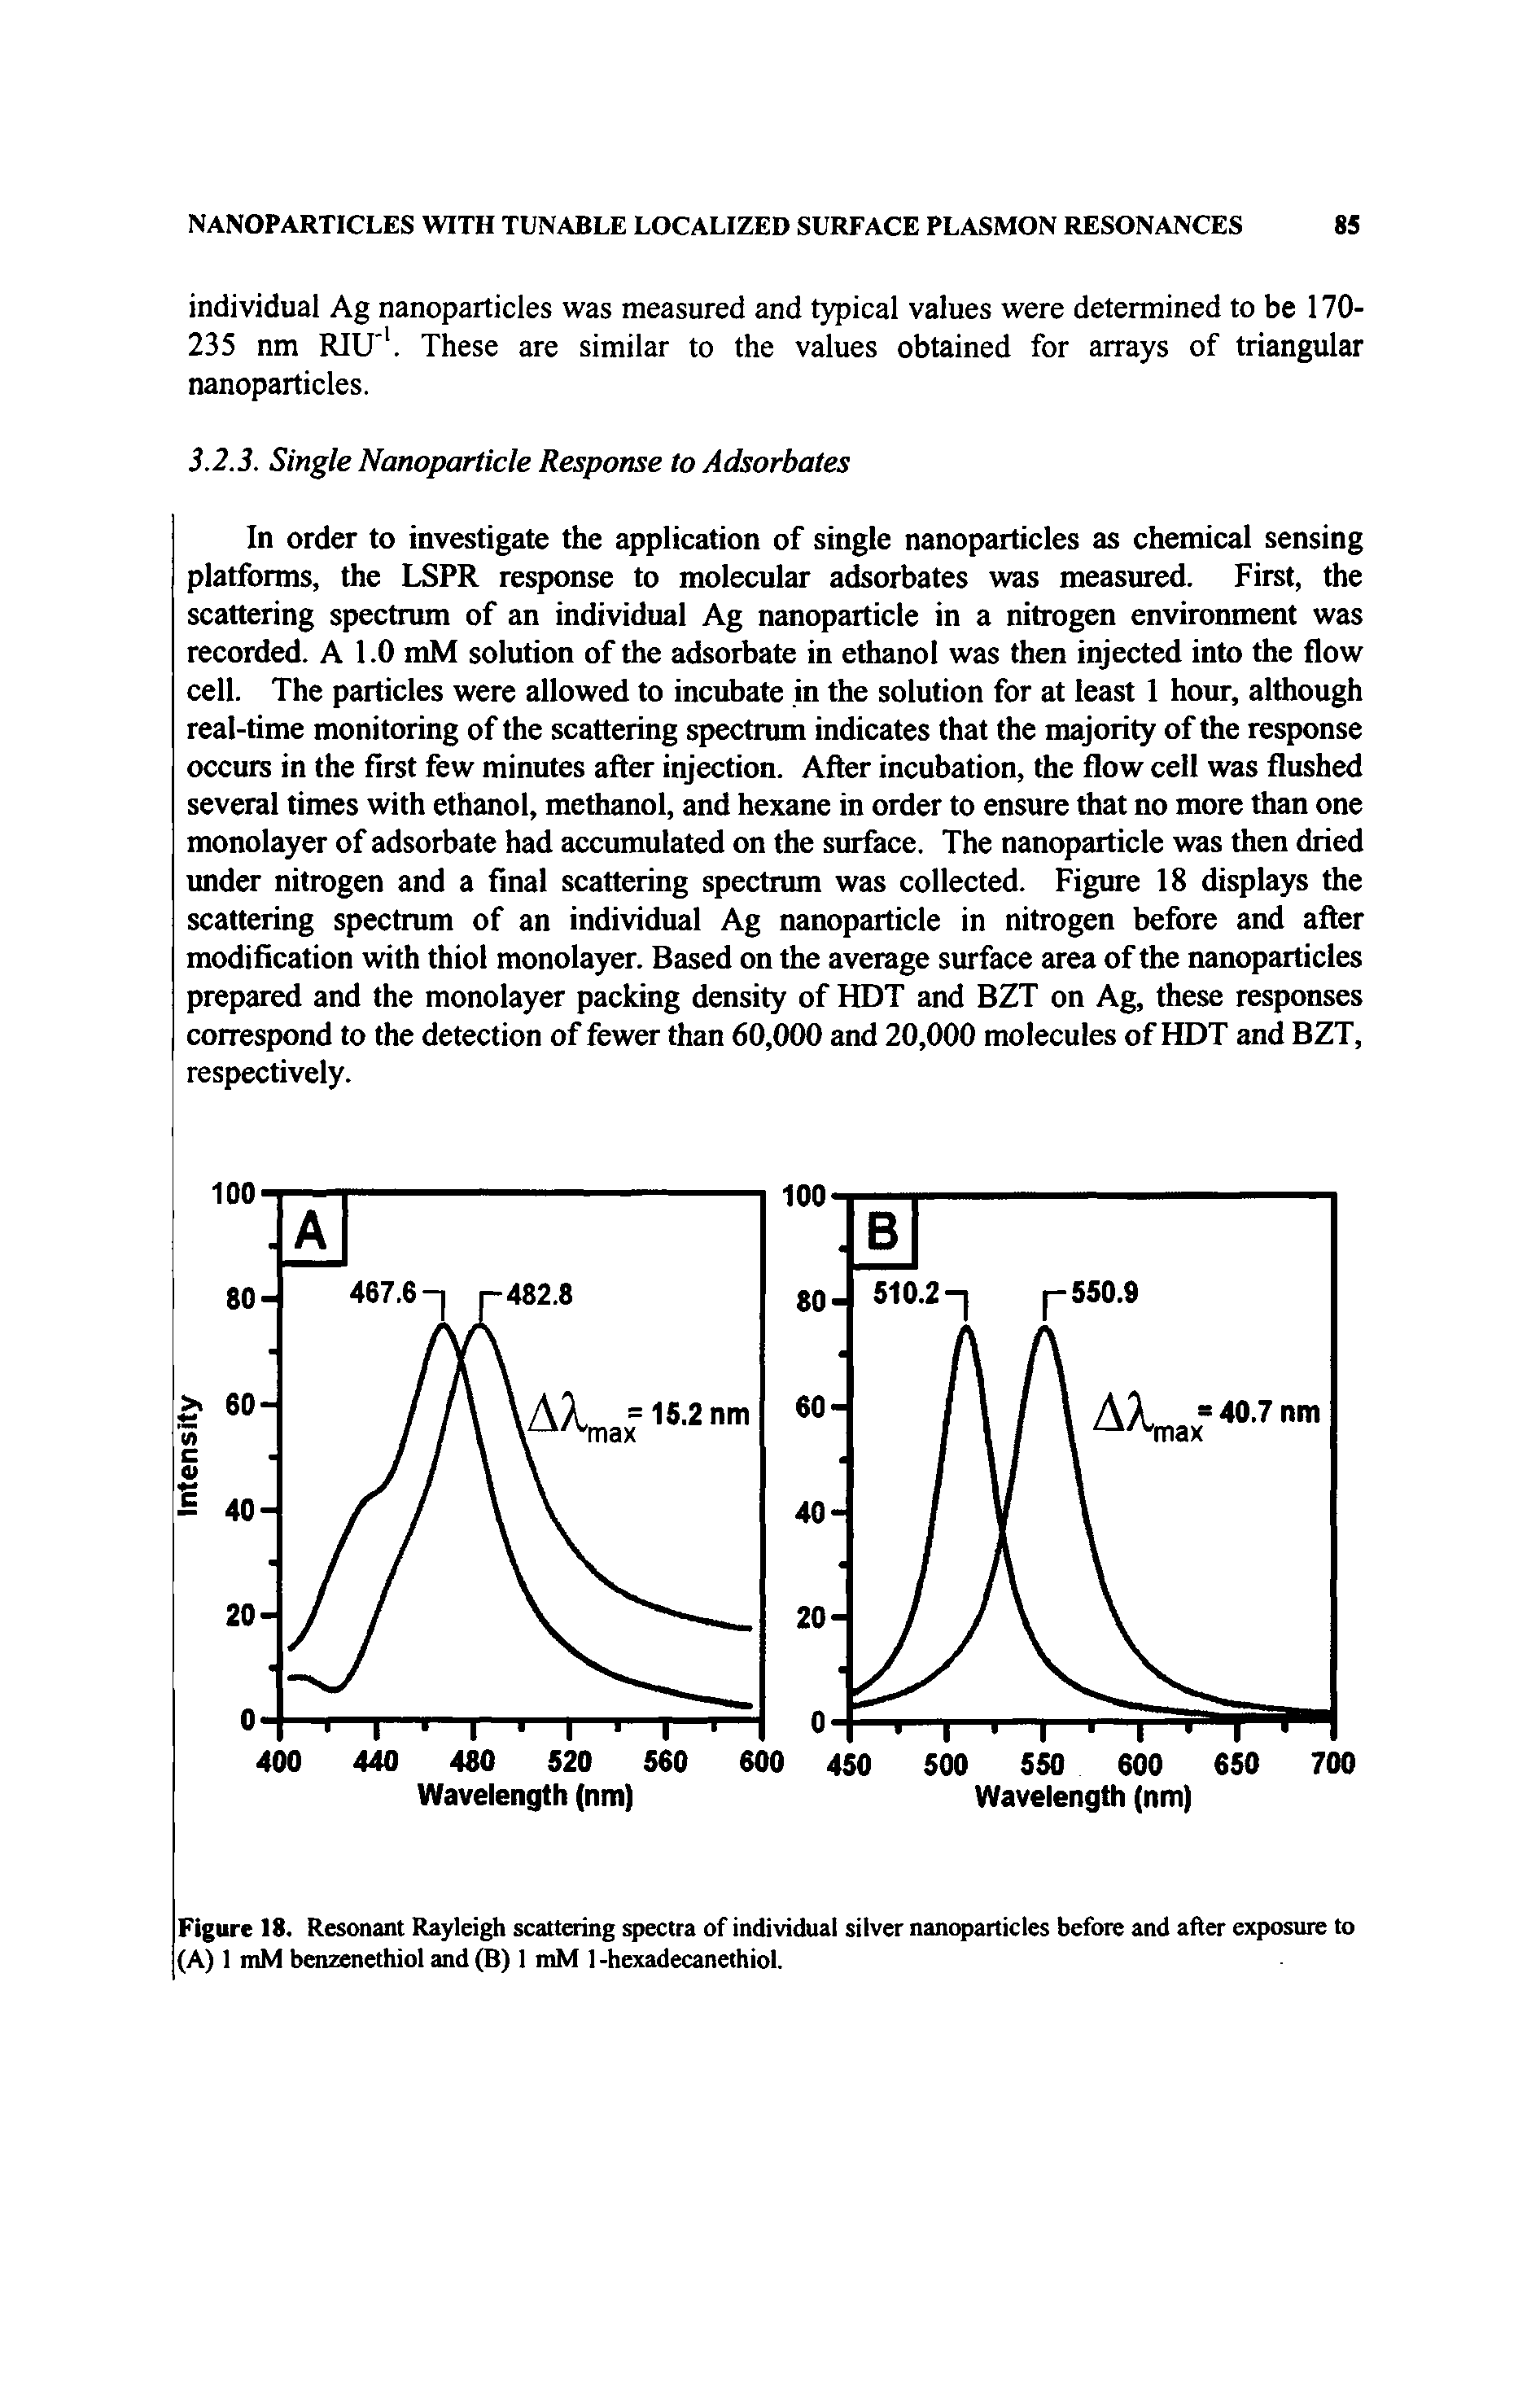 Figure 18. Resonant Rayleigh scattering spectra of individual silver nanoparticles before and after exposure to (A) 1 mM benzenethiol and (B) 1 mM l-hexadecanethiol.